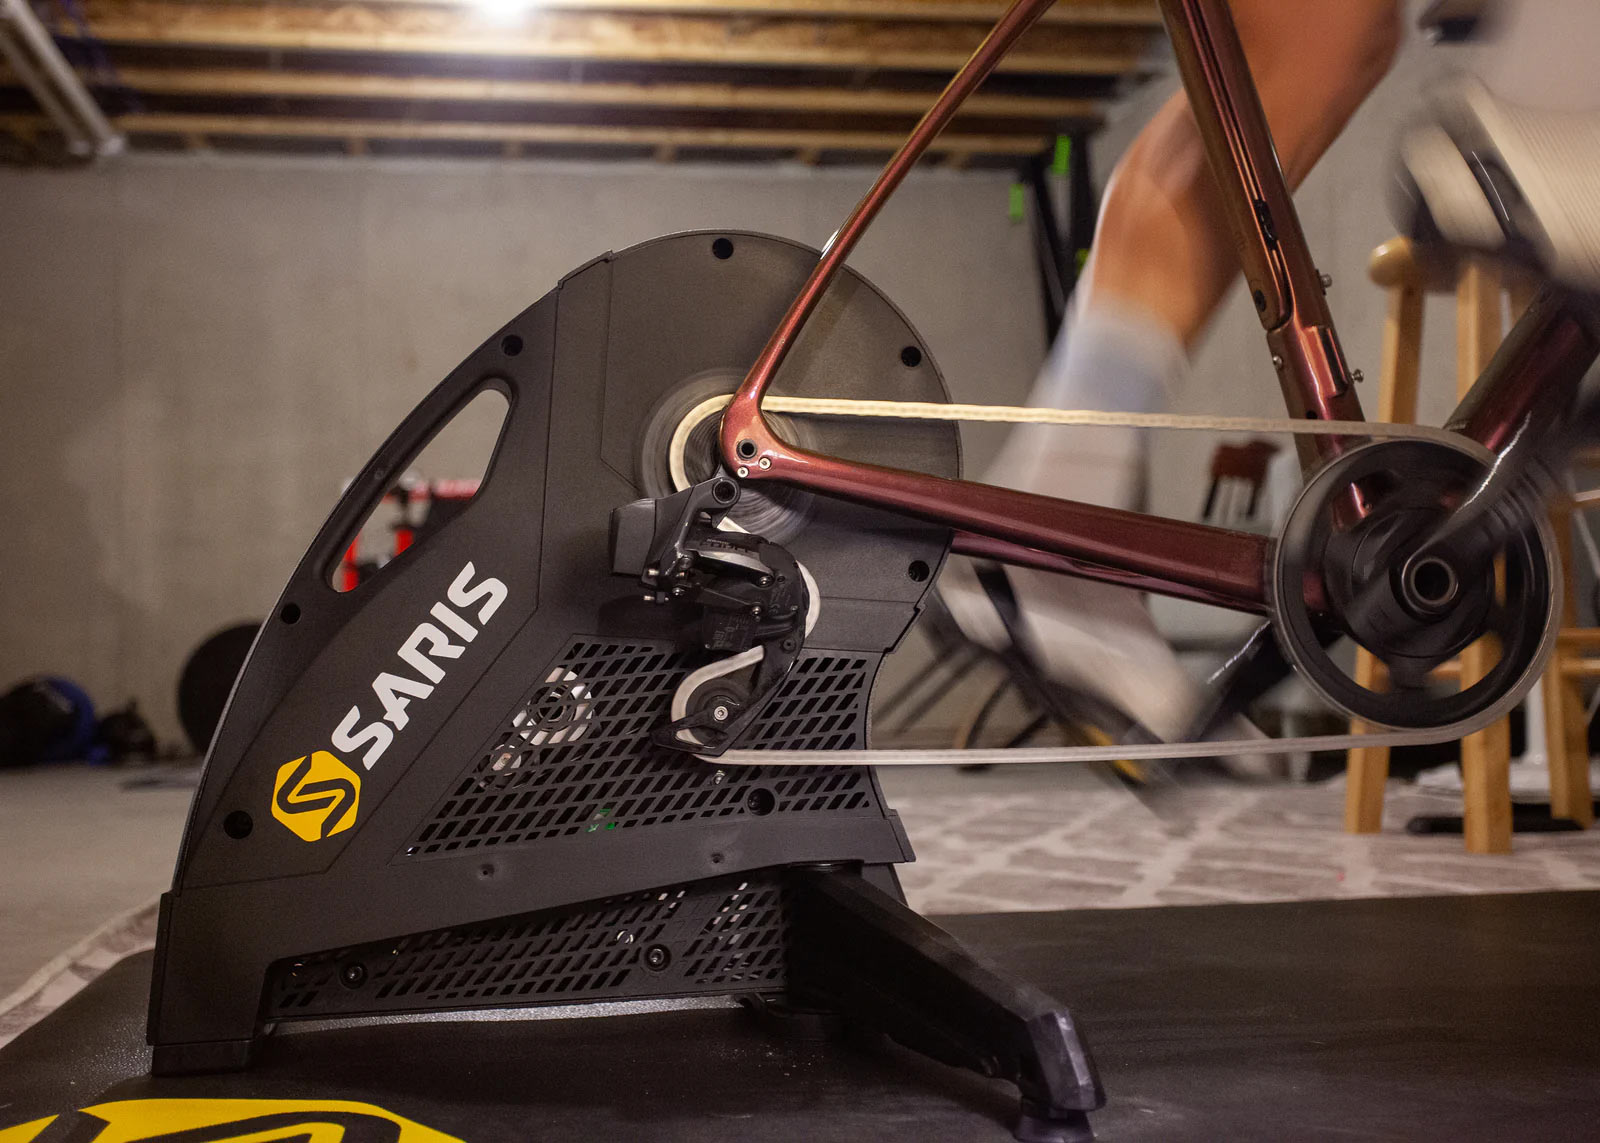 saris h3 plus smart trainer shown from the side